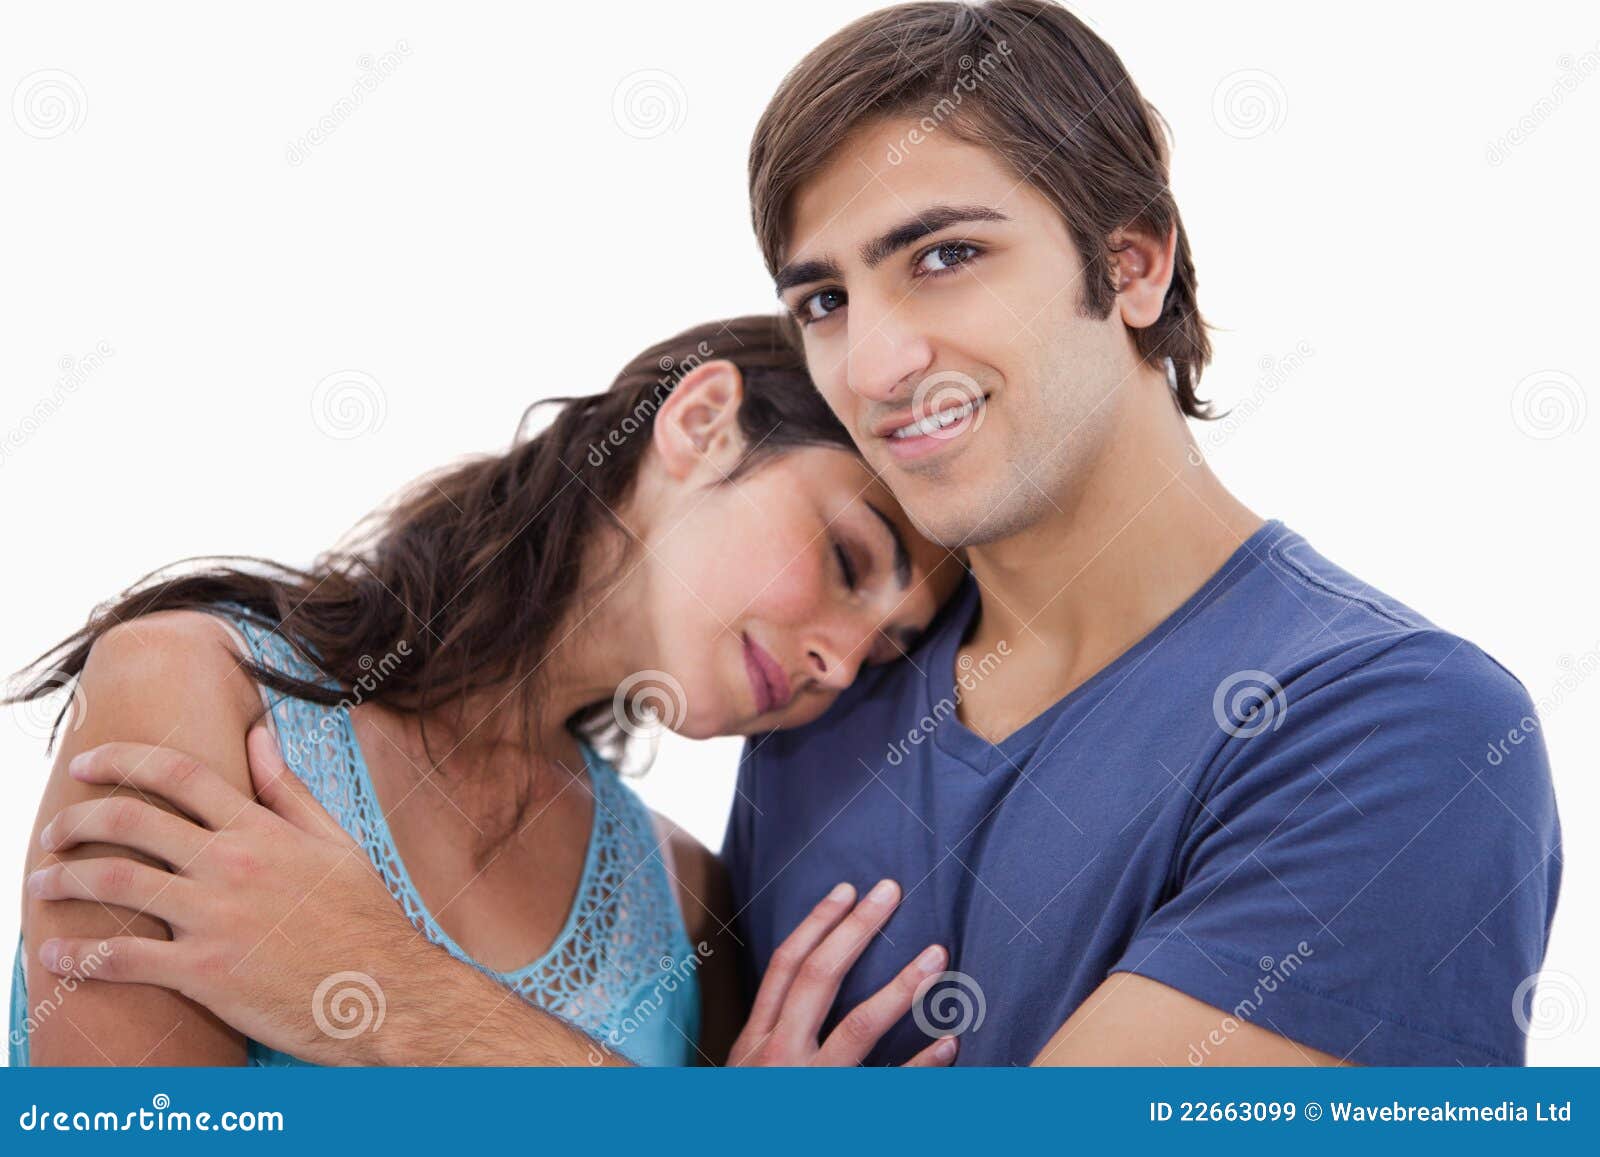 Couple Embracing Each Other Royalty Free Stock Images - Image: 22663099